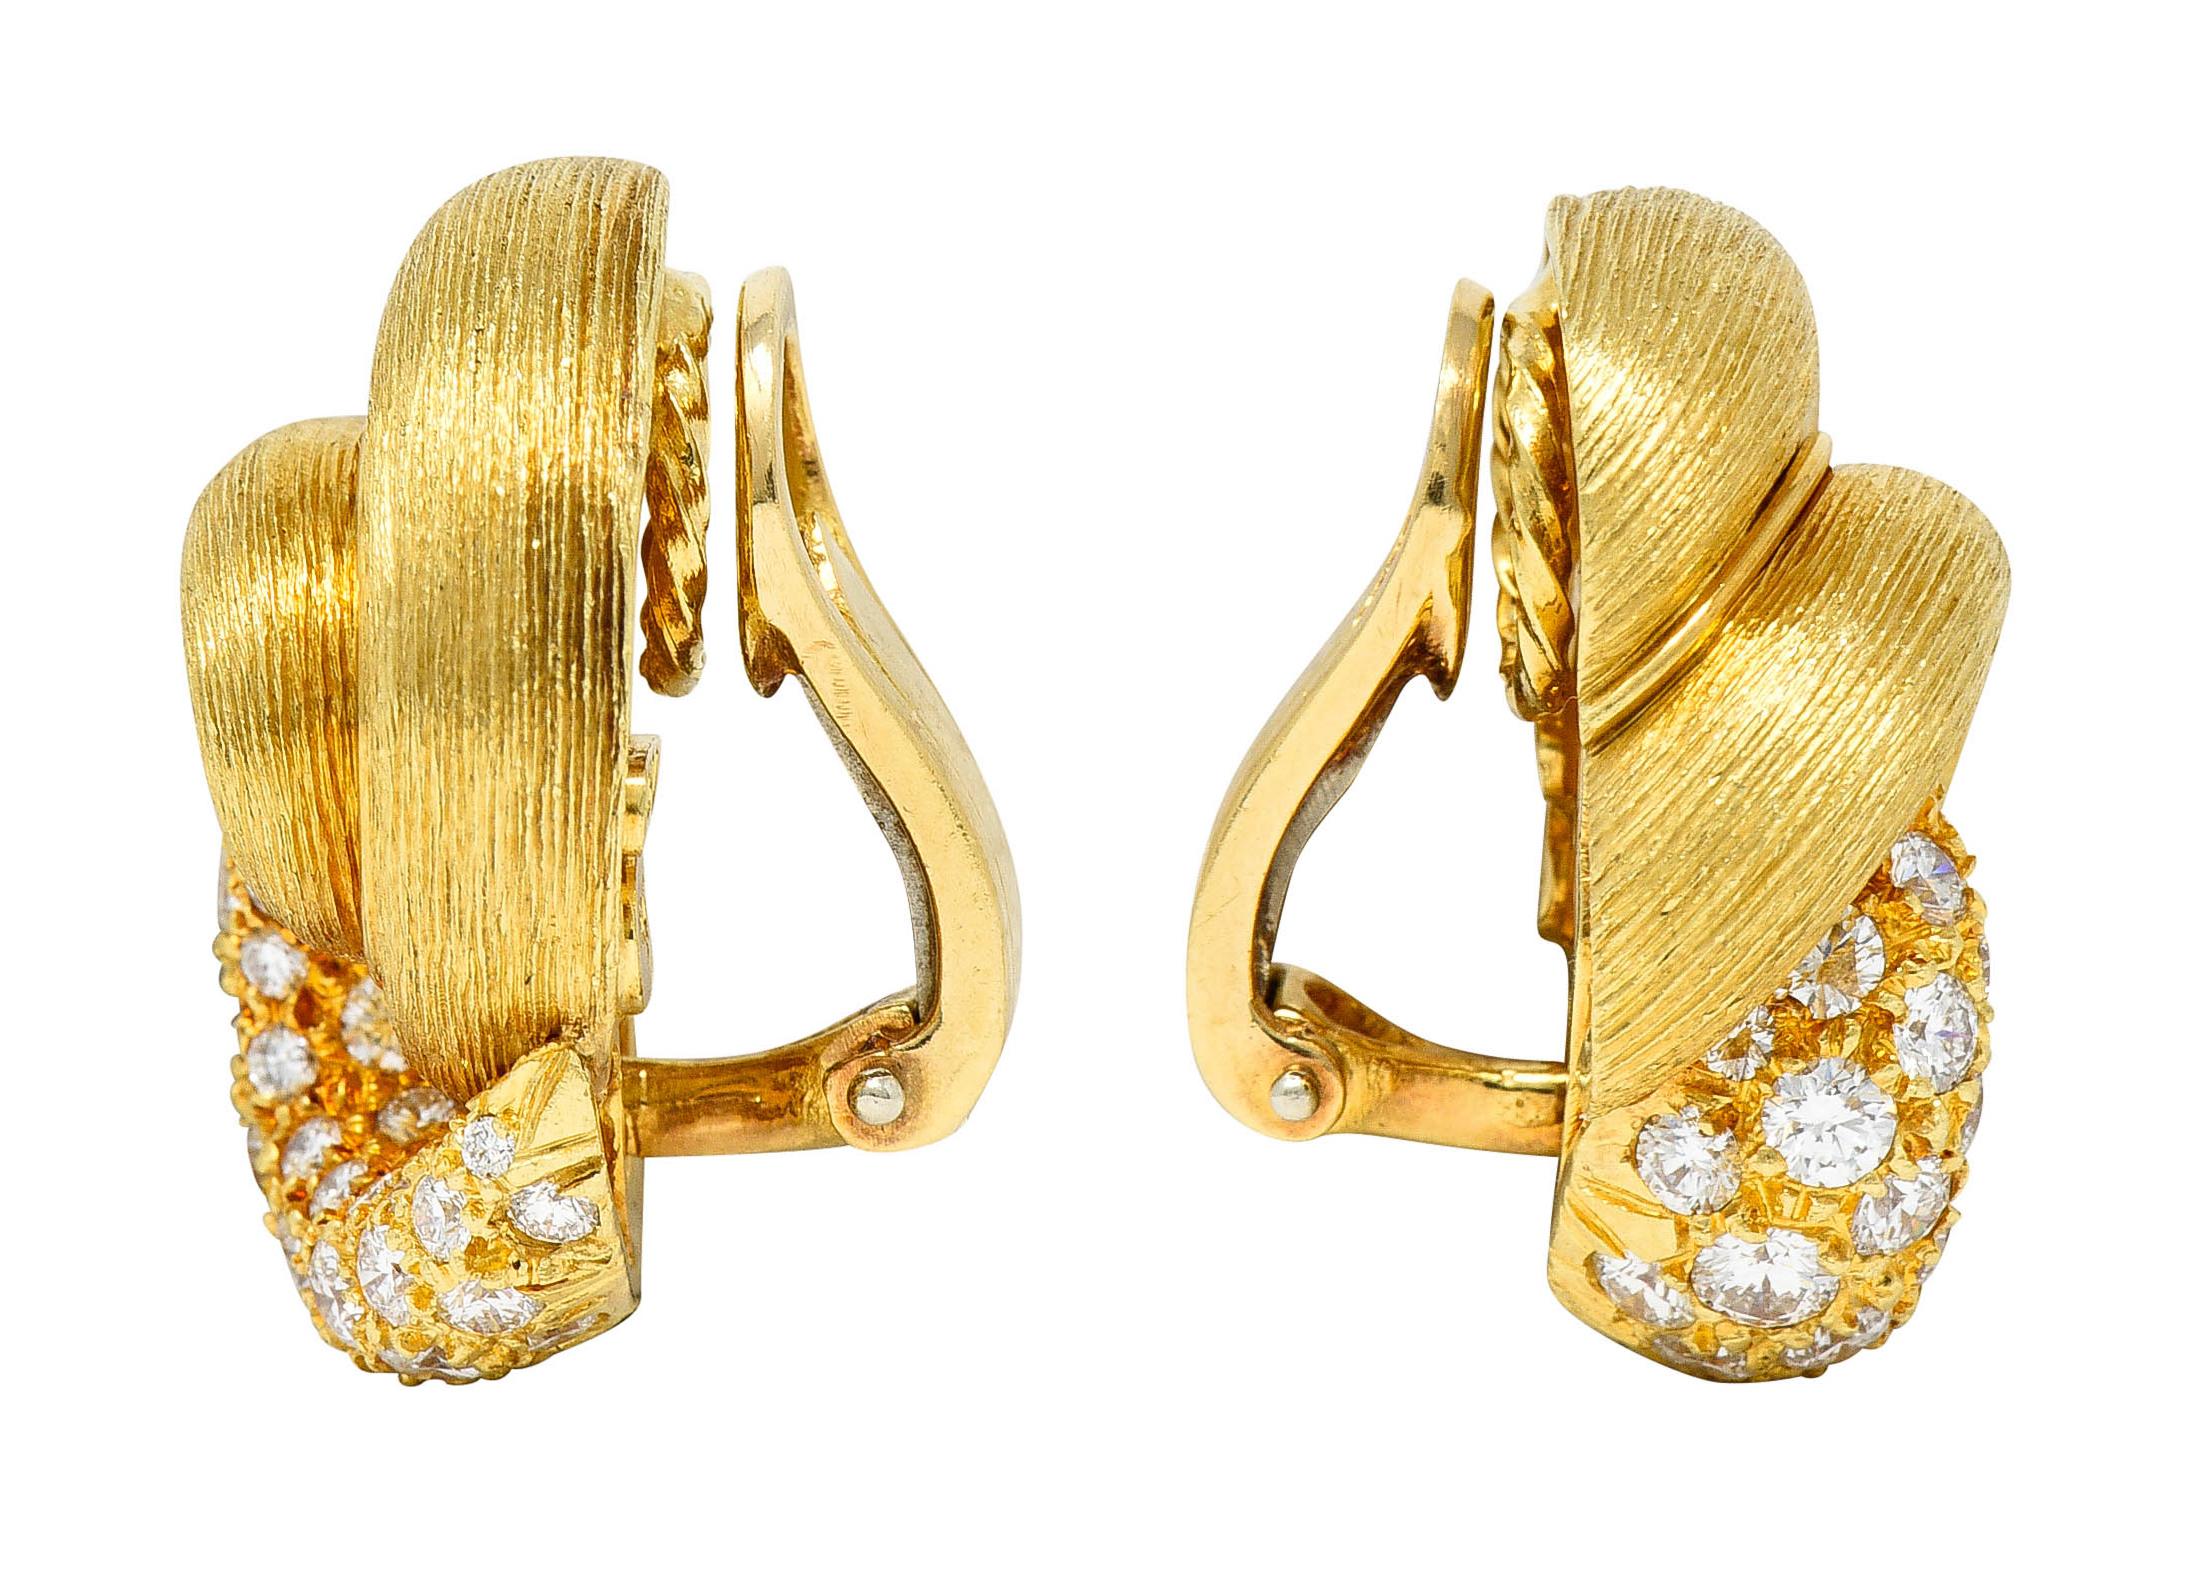 Ear-clips are depicted as twisting knots with a deeply ridged texture

Pavè set with round brilliant cut diamonds

Weighing in total approximately 2.00 carats with G/H color and VS in clarity

Completed by hinged omega backs

Stamped 18K for 18